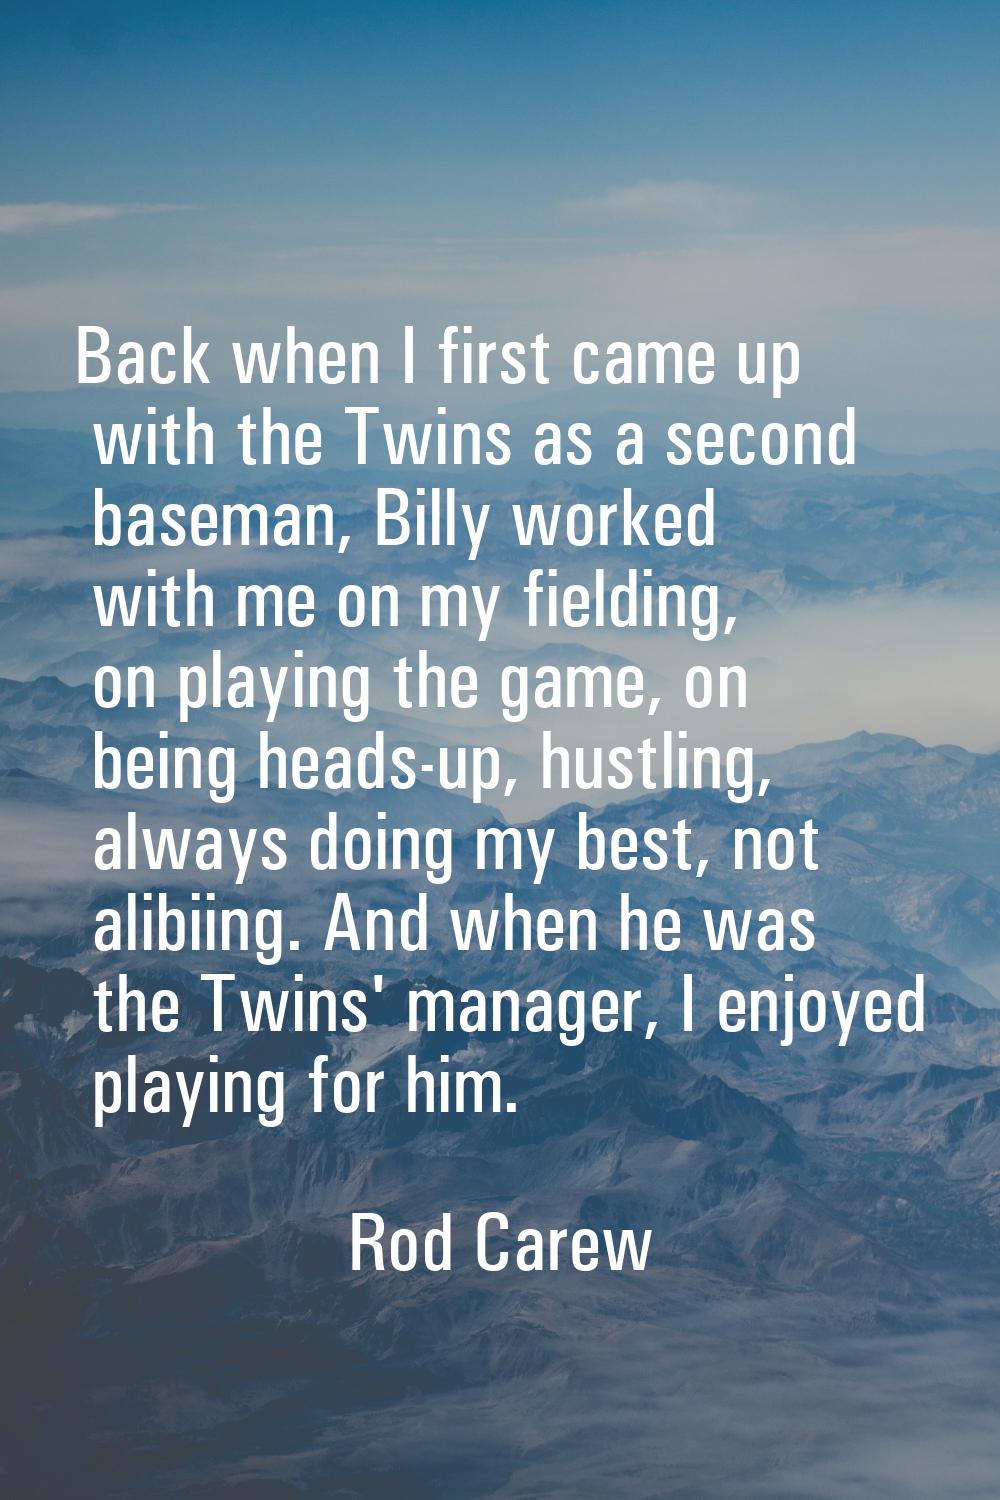 Back when I first came up with the Twins as a second baseman, Billy worked with me on my fielding, 